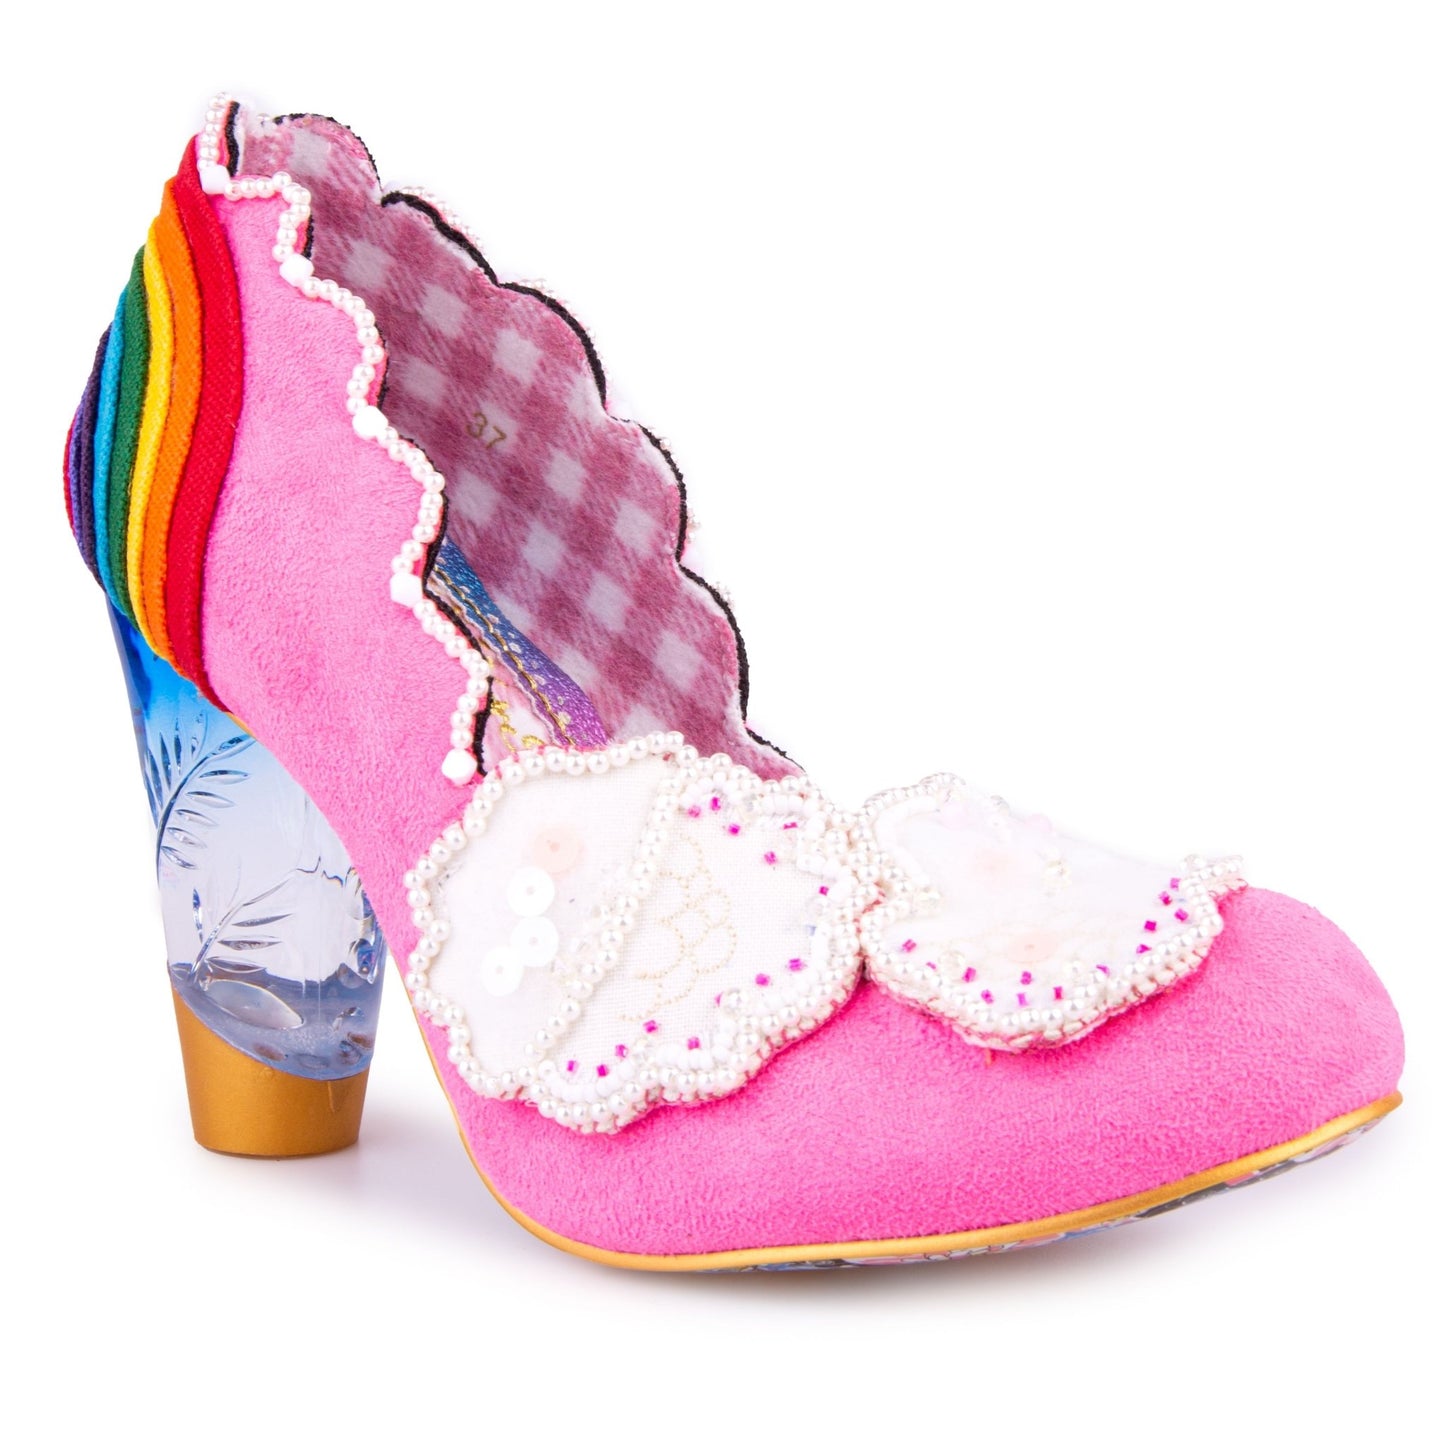 Shirley Bass - Pink - Rockamilly-Shoes-Vintage